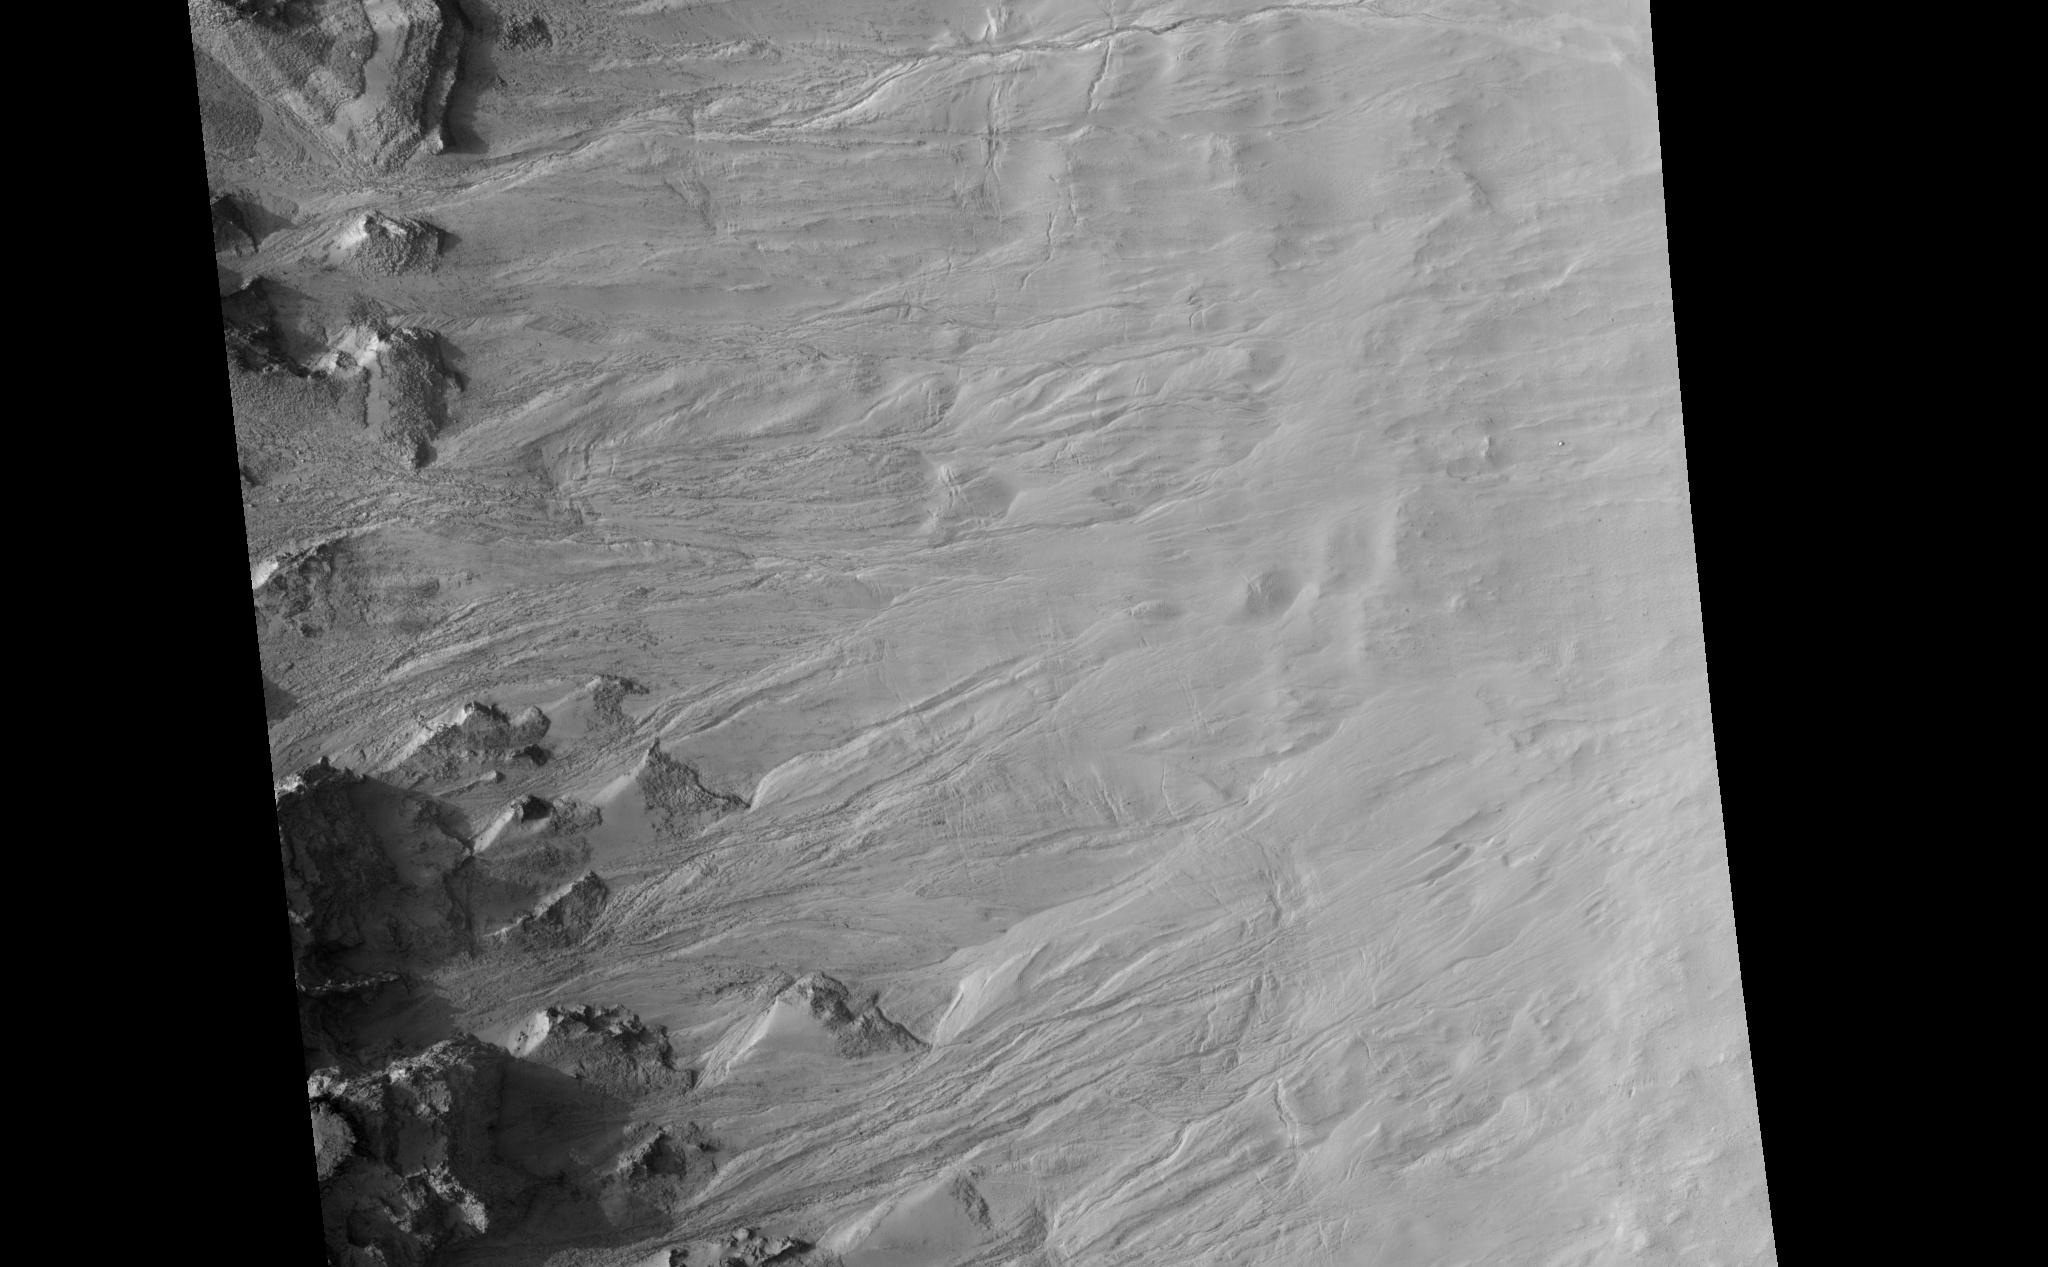 Geologically young gullies are a prime target for the HiRISE camera. Gullies are located in a variety of settings and are found all over Mars.This "ring trough" or eroded pit crater, is located in the rugged southern highland terrain known as Noachis Terra. The HiRISE image shows the layered, boulder-rich wall rock facing to the northeast and gullies that are transporting material downslope.The material collects into debris aprons along the walls, which often exhibit narrow channels along its surface.